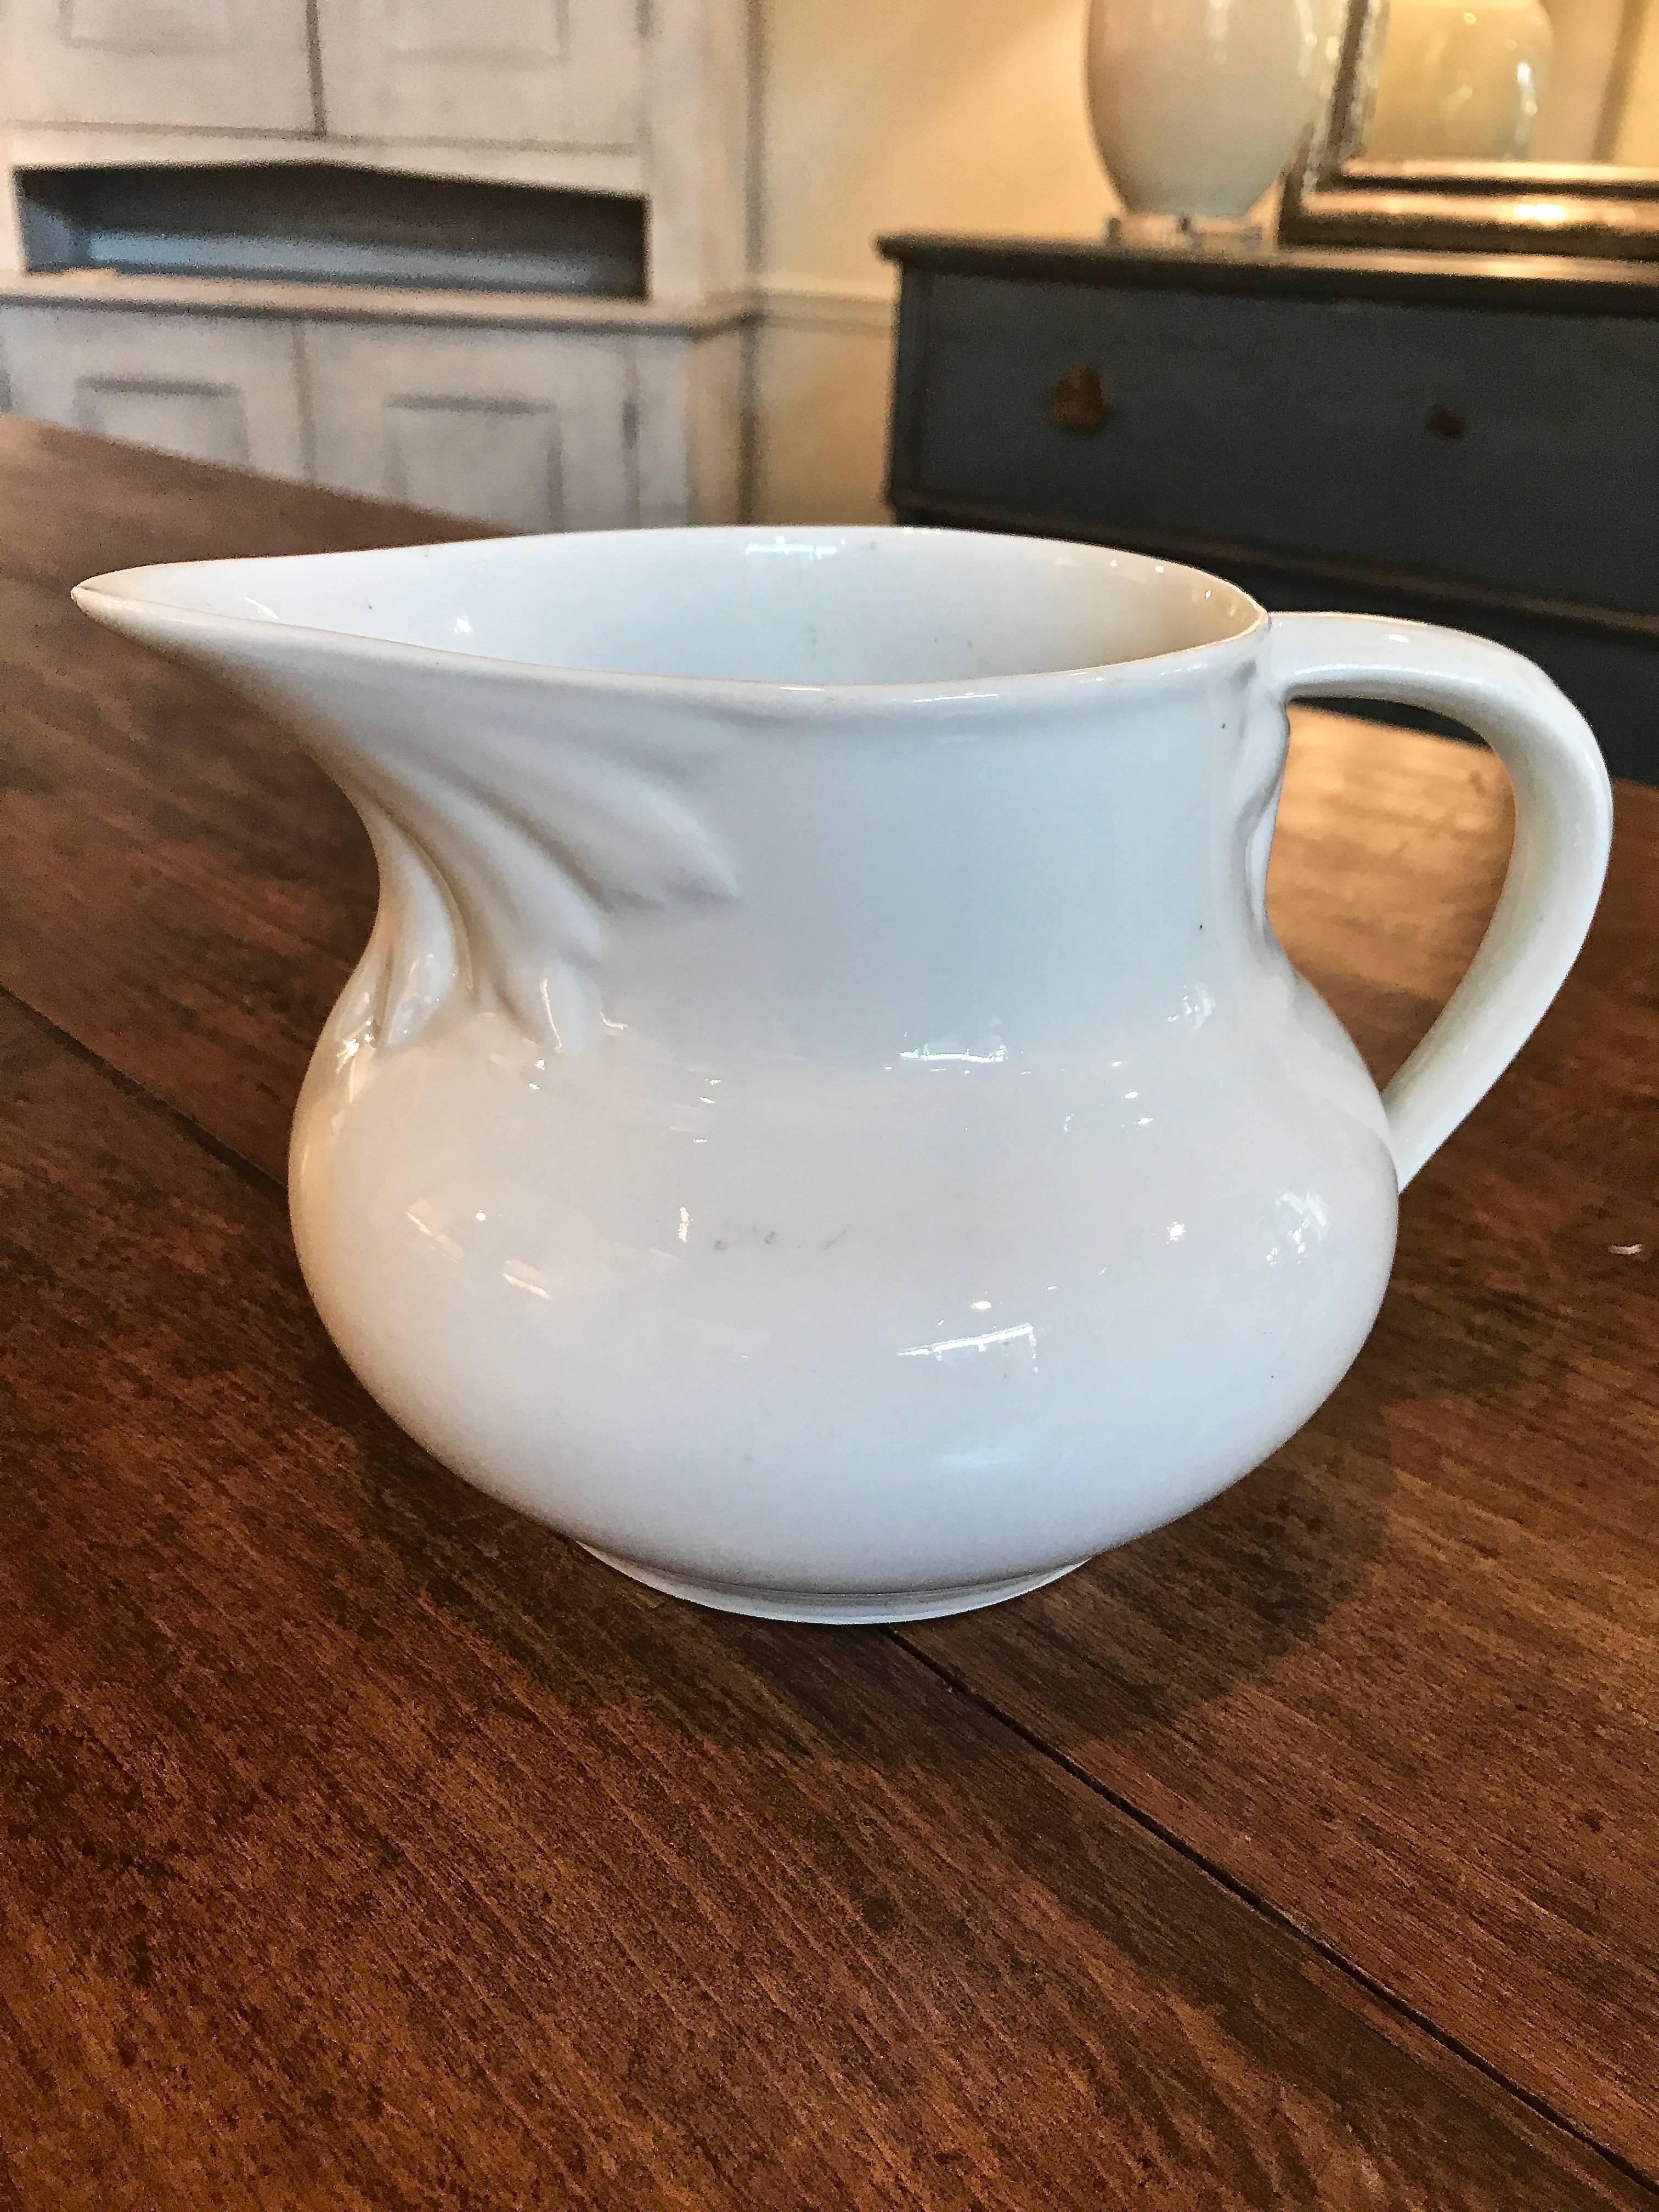 Early 20th century English ironstone jug with floral detail.